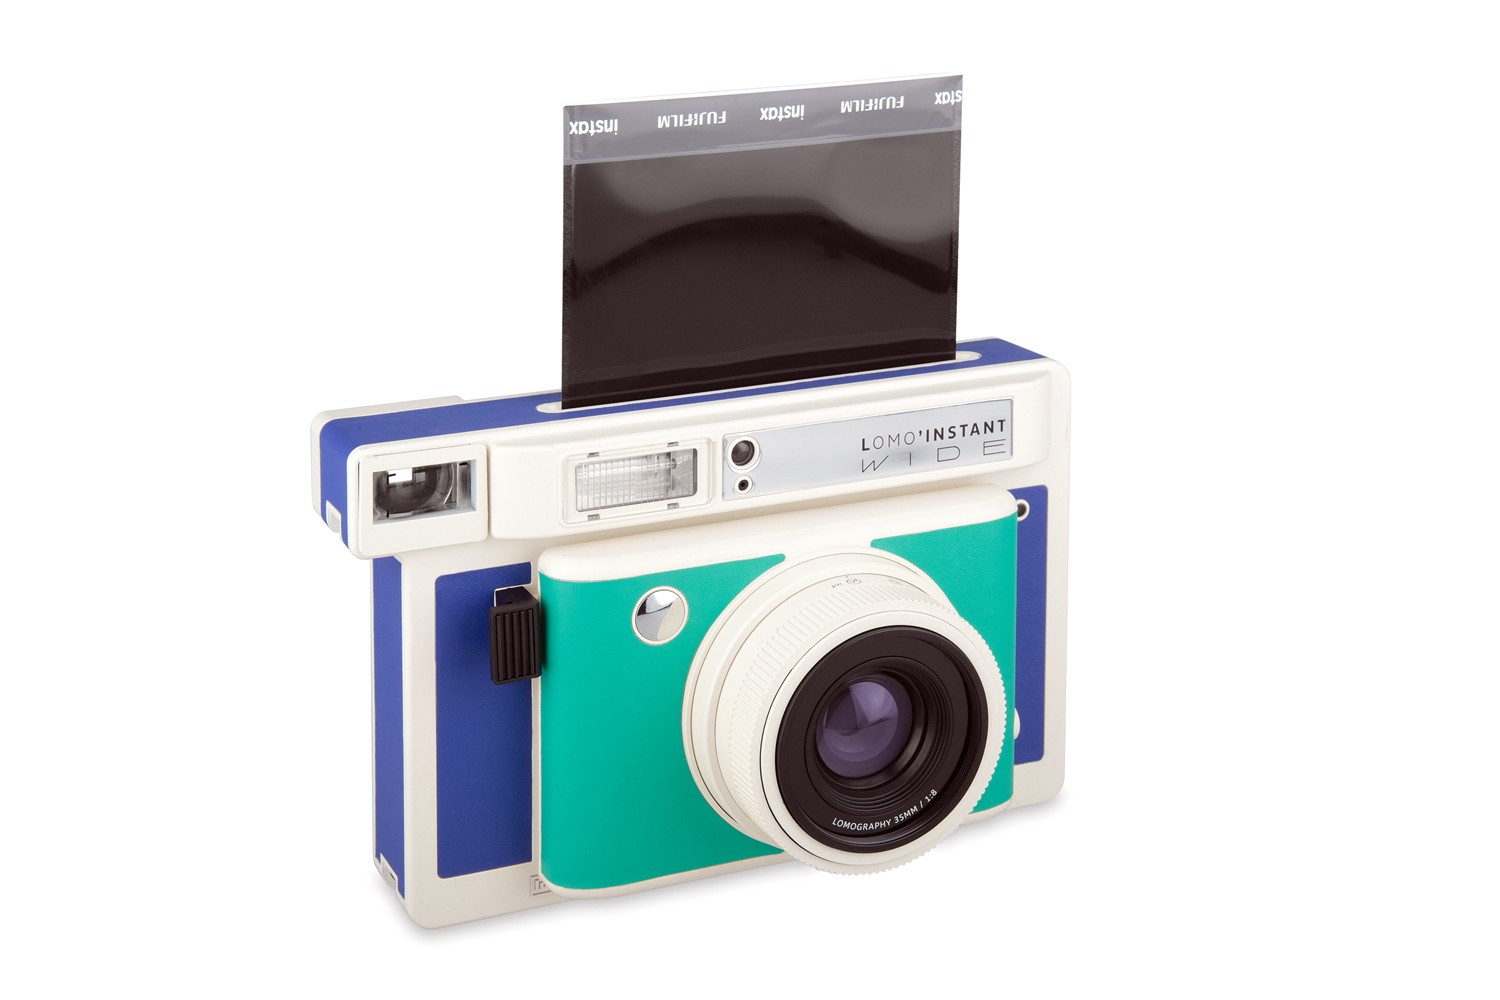 SNAPPP-Lomo'instant wide-sale